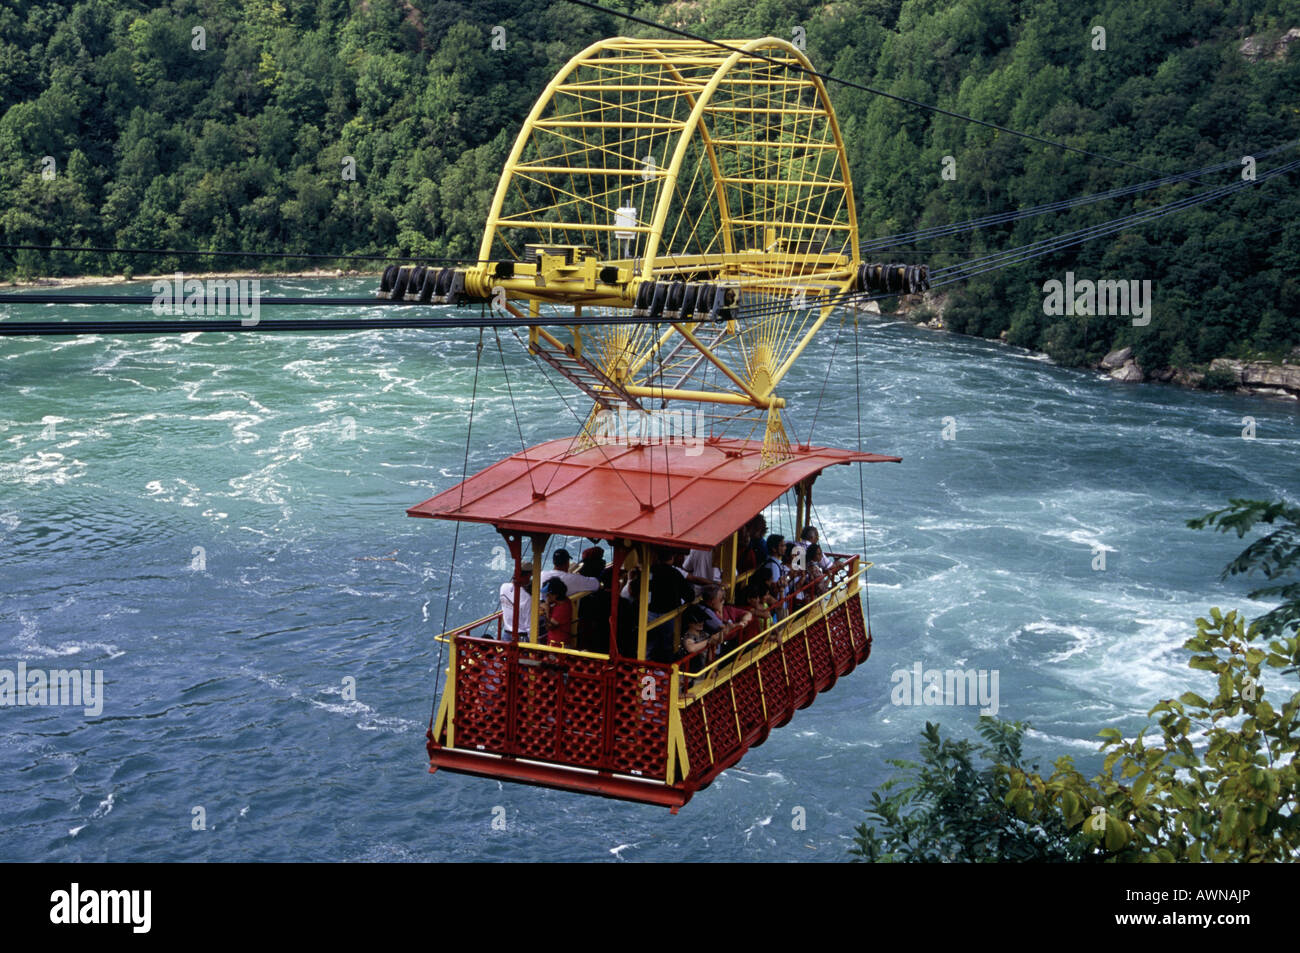 River. Swirling waters. Below waterfalls. Spanish Aero cable car above water. People. Stock Photo